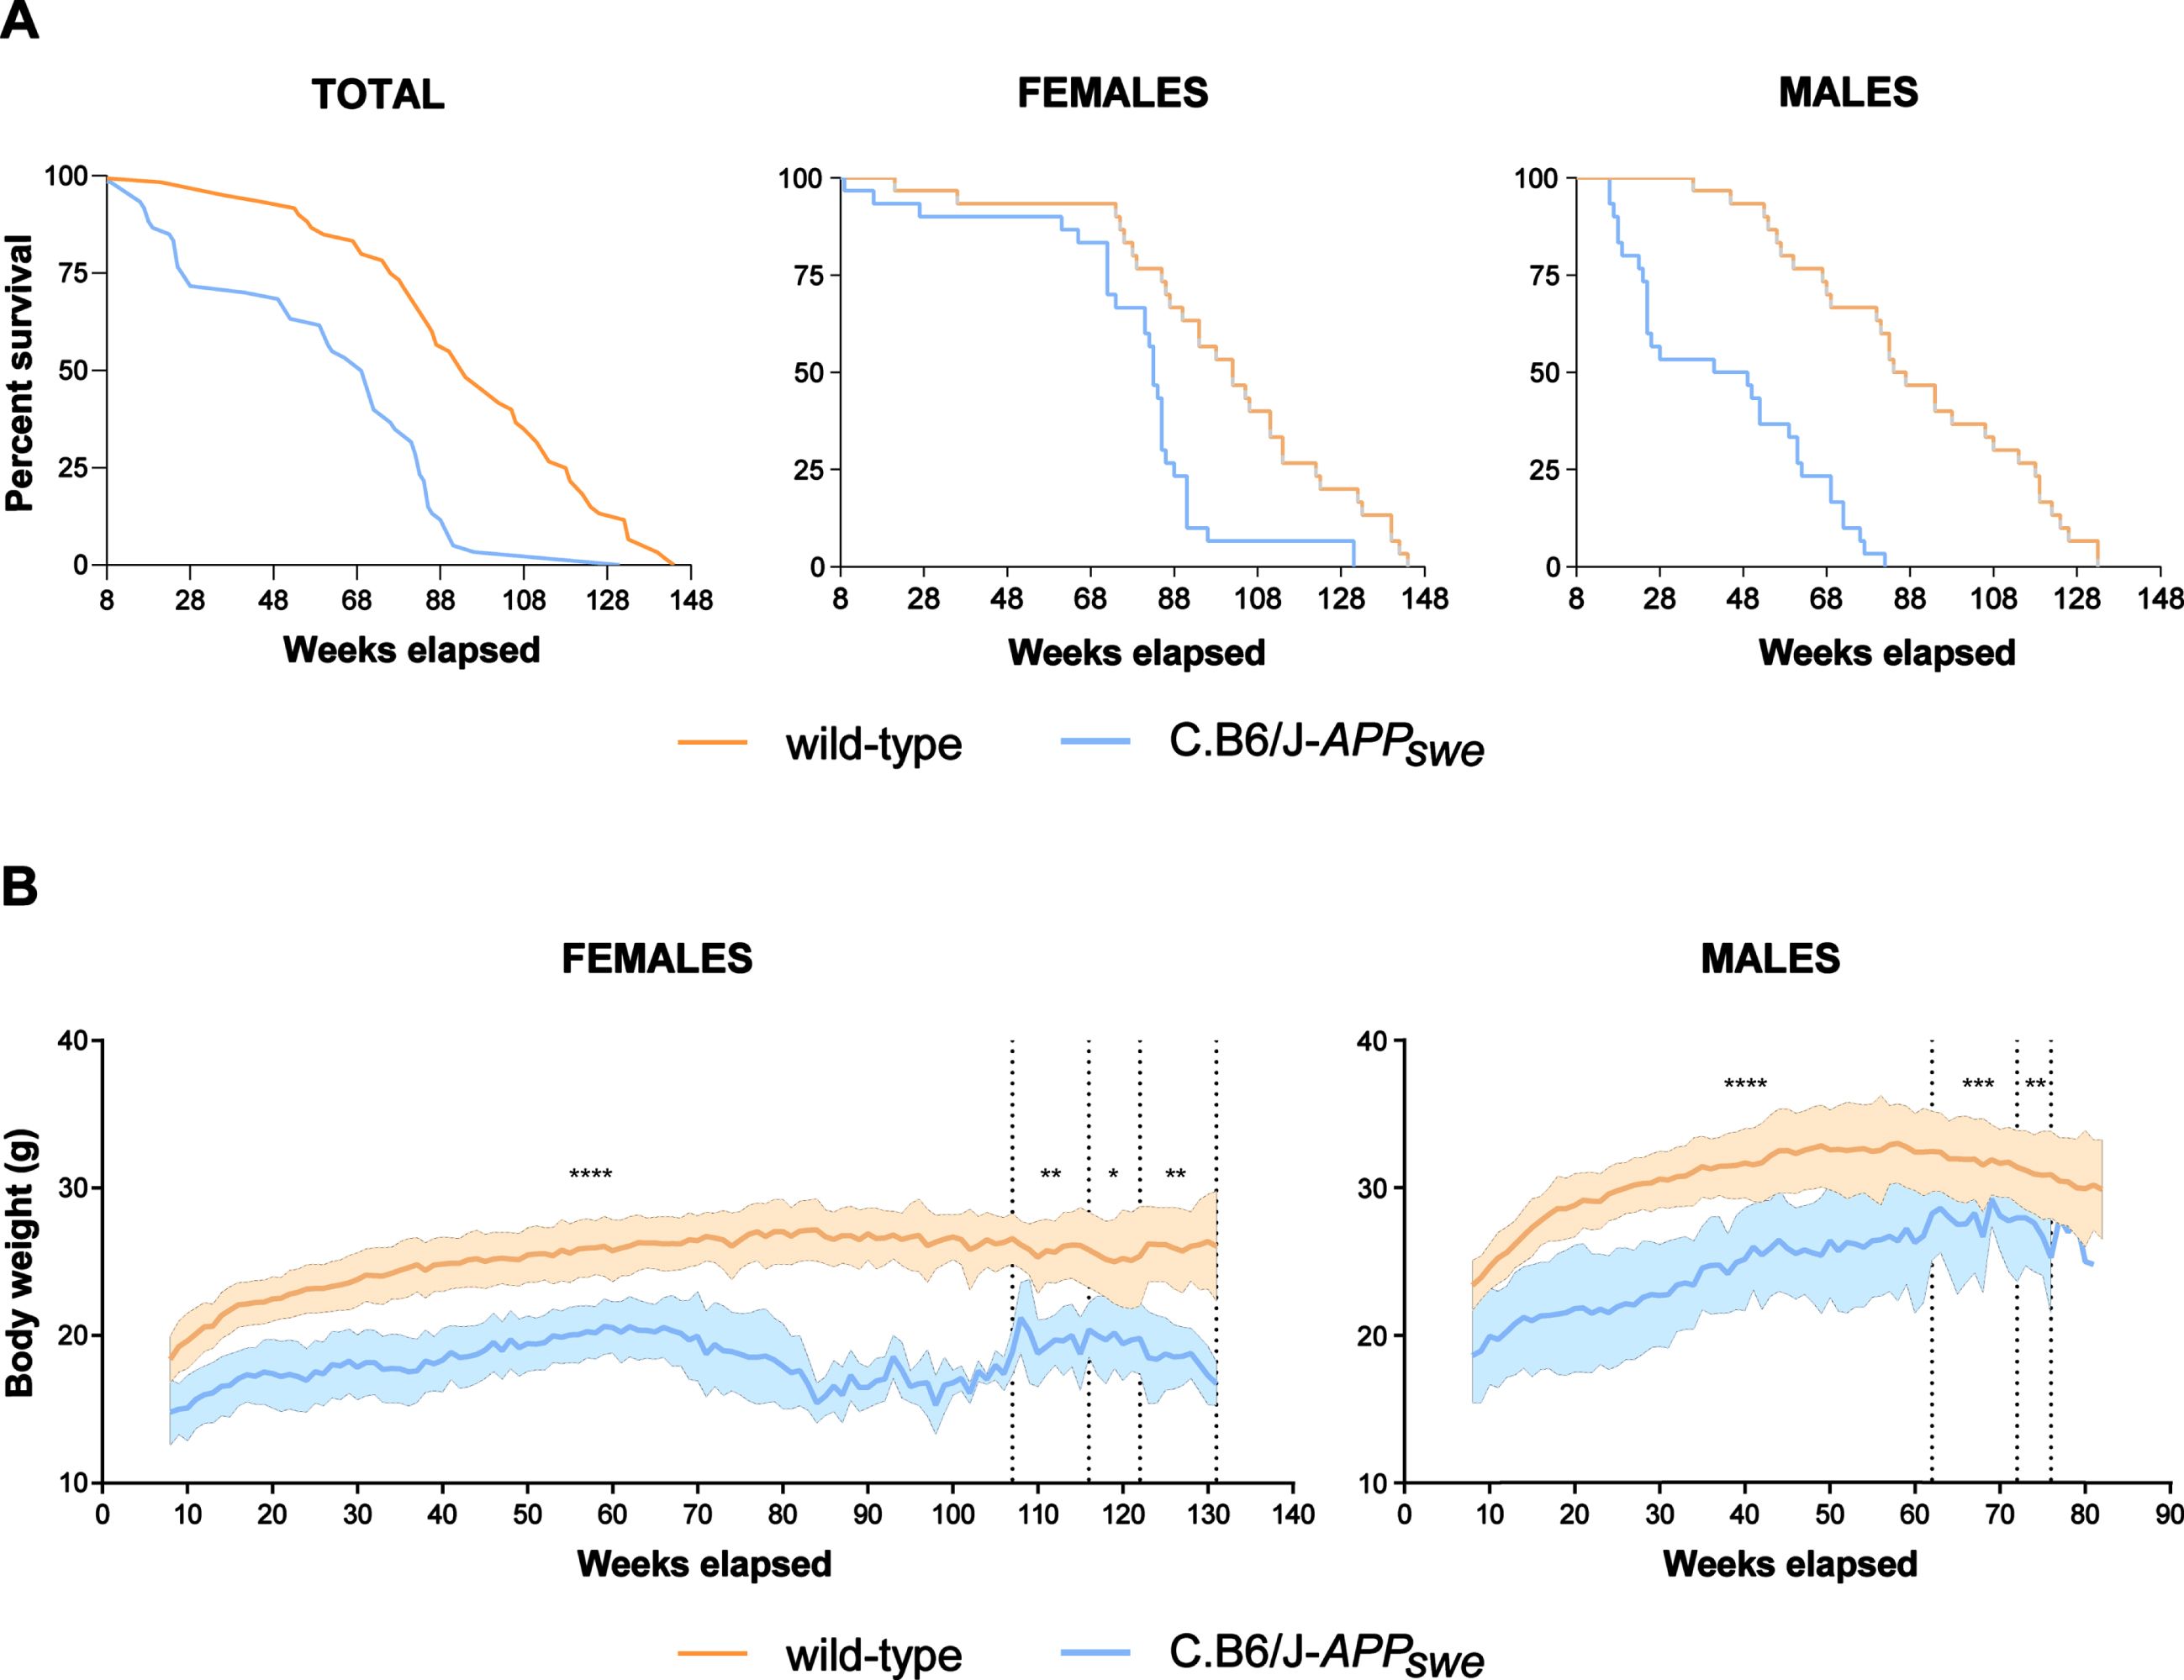 C.B6/J-APPswe mice live less, especially male animals, and have a lower body weight than wild-type mice. A) Congenic mice (30 males and 30 females) had a significantly shorter lifespan than wild-type mice (30 males and 30 females). Survival curve showed sex-related differences: in wild-type and congenic females it was similar until the 60th week, whereas in wild-type and congenic males it diverged from the 24th week. This implies that while no females remained without cage-mates at any experimental time point, a varying proportion of male animals remained alone, i.e., 0% at 3 months, 4% at 6 months, 25% at 9 months, 20% at 12 months and 100% at 16–18 months. B) The congenic mice (30 males and 30 females) had a significantly lower body weight than wild-type mice (30 males and 30 females); in females the difference was stable, whereas in males it tended to decrease over time. Student’s t test: *p < 0.05, **p < 0.01, ***p < 0.001, ****p < 0.0001.